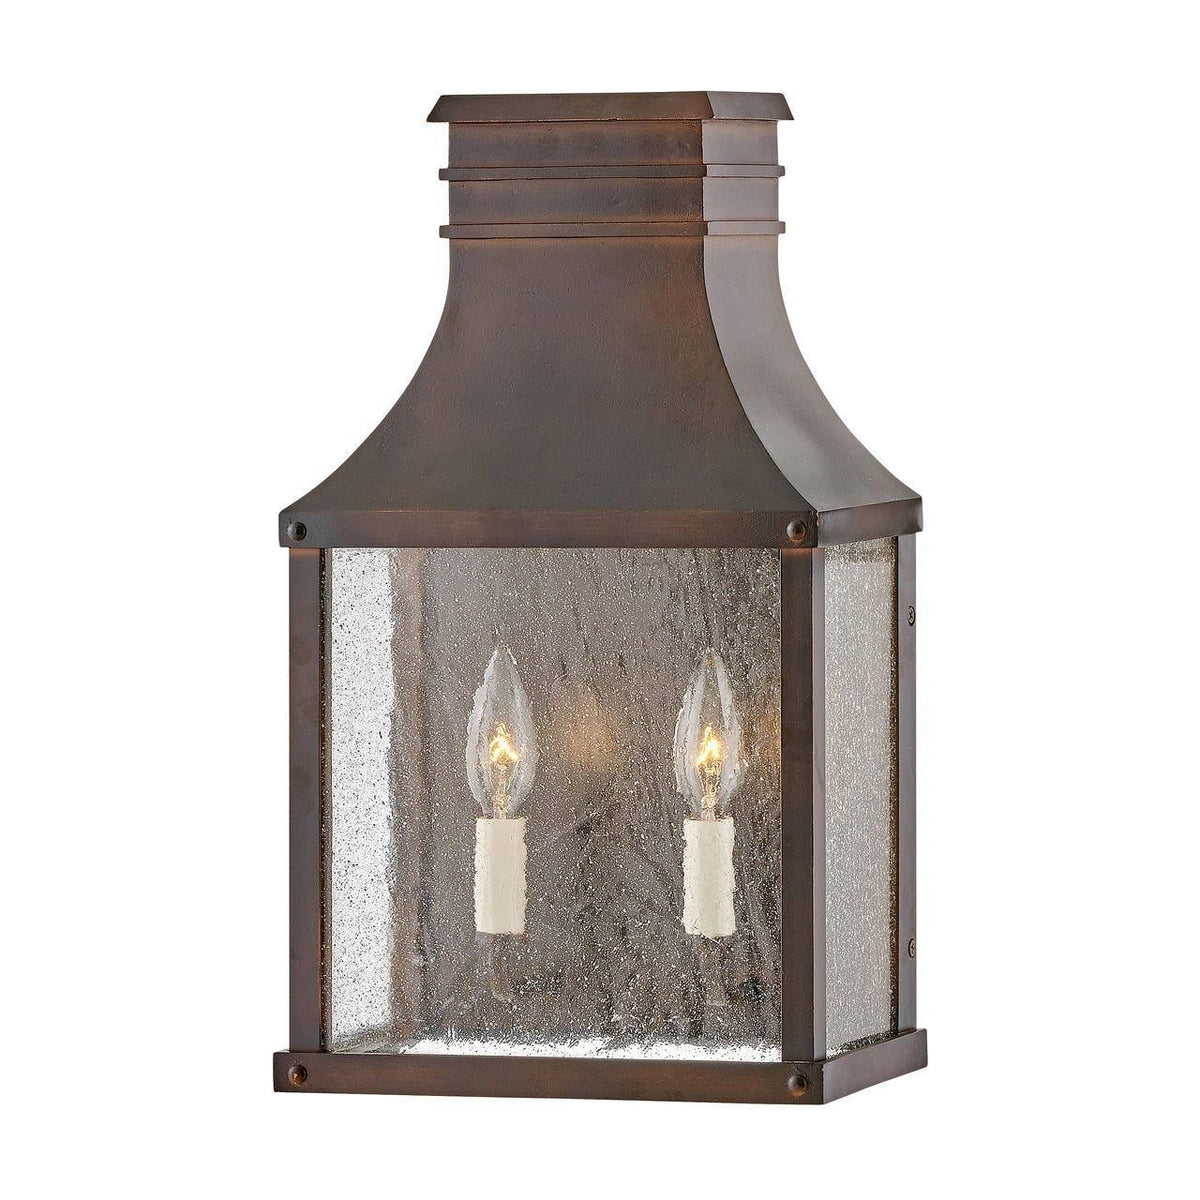 Hinkley Canada - 17466BLC - LED Wall Mount - Beacon Hill - Blackened Copper